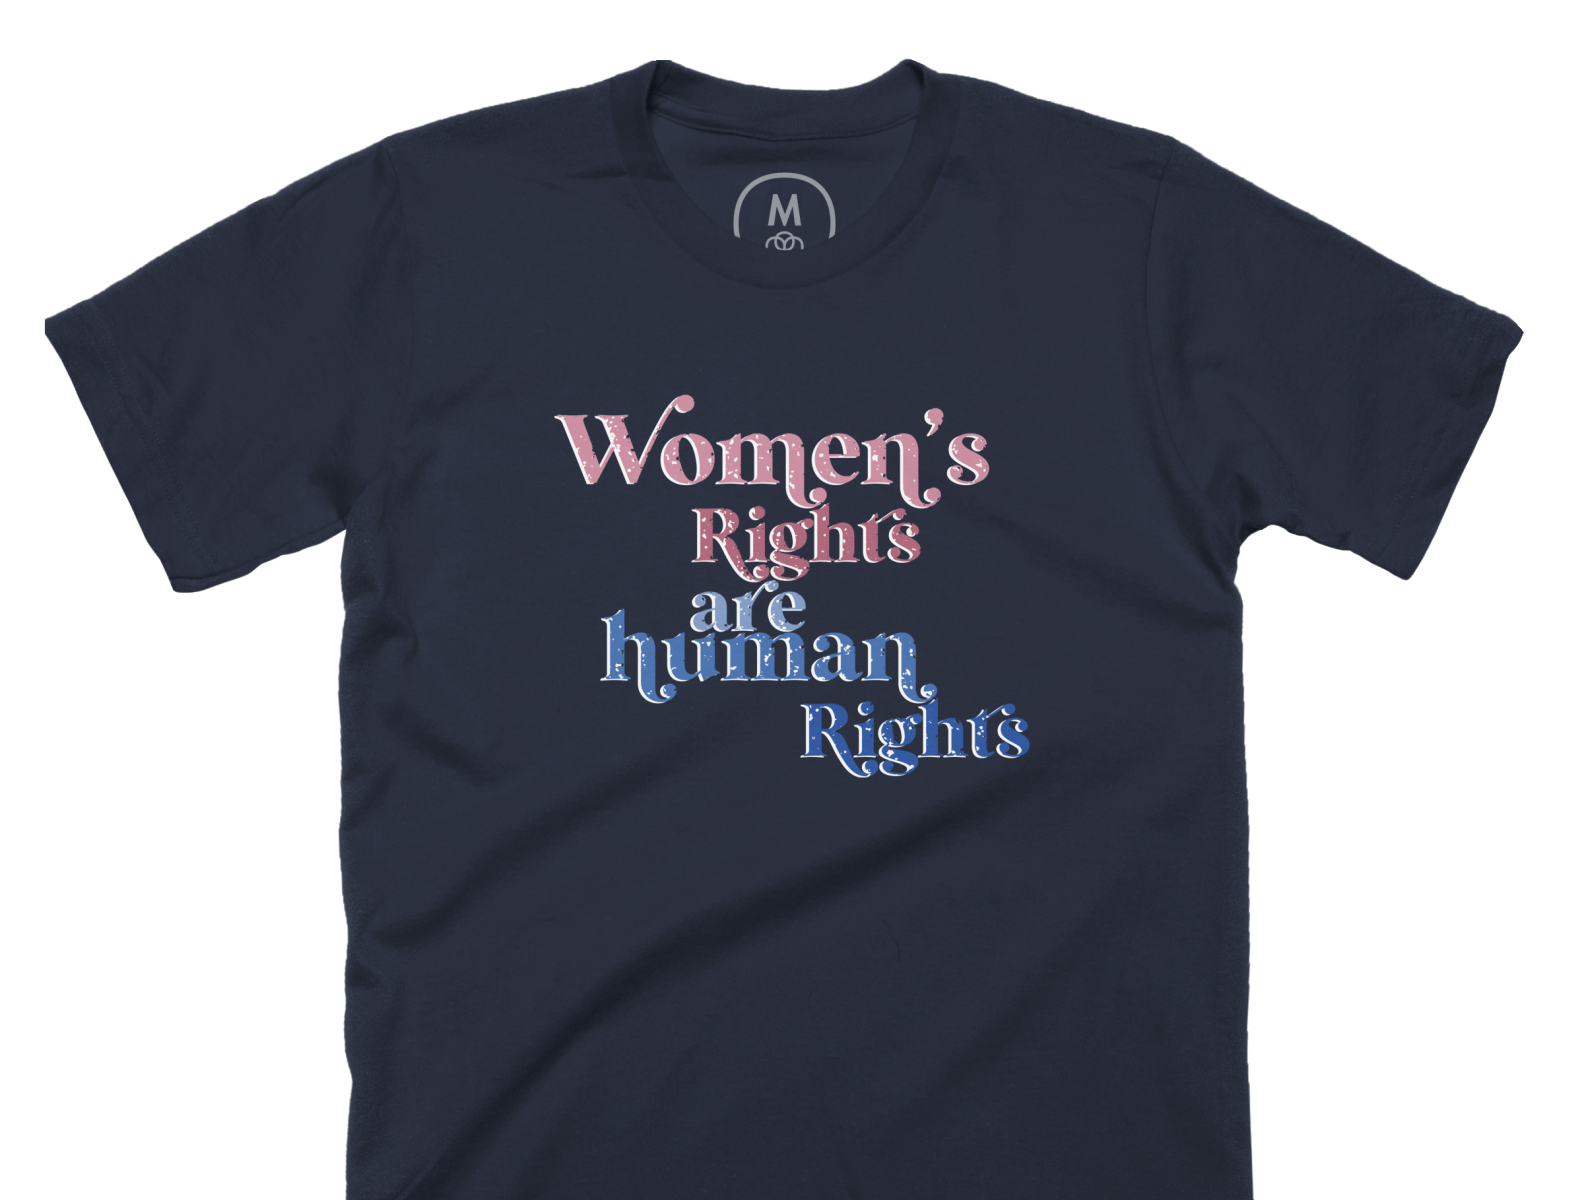 Women's Rights are Human Rights by Jason Carrasco on Dribbble